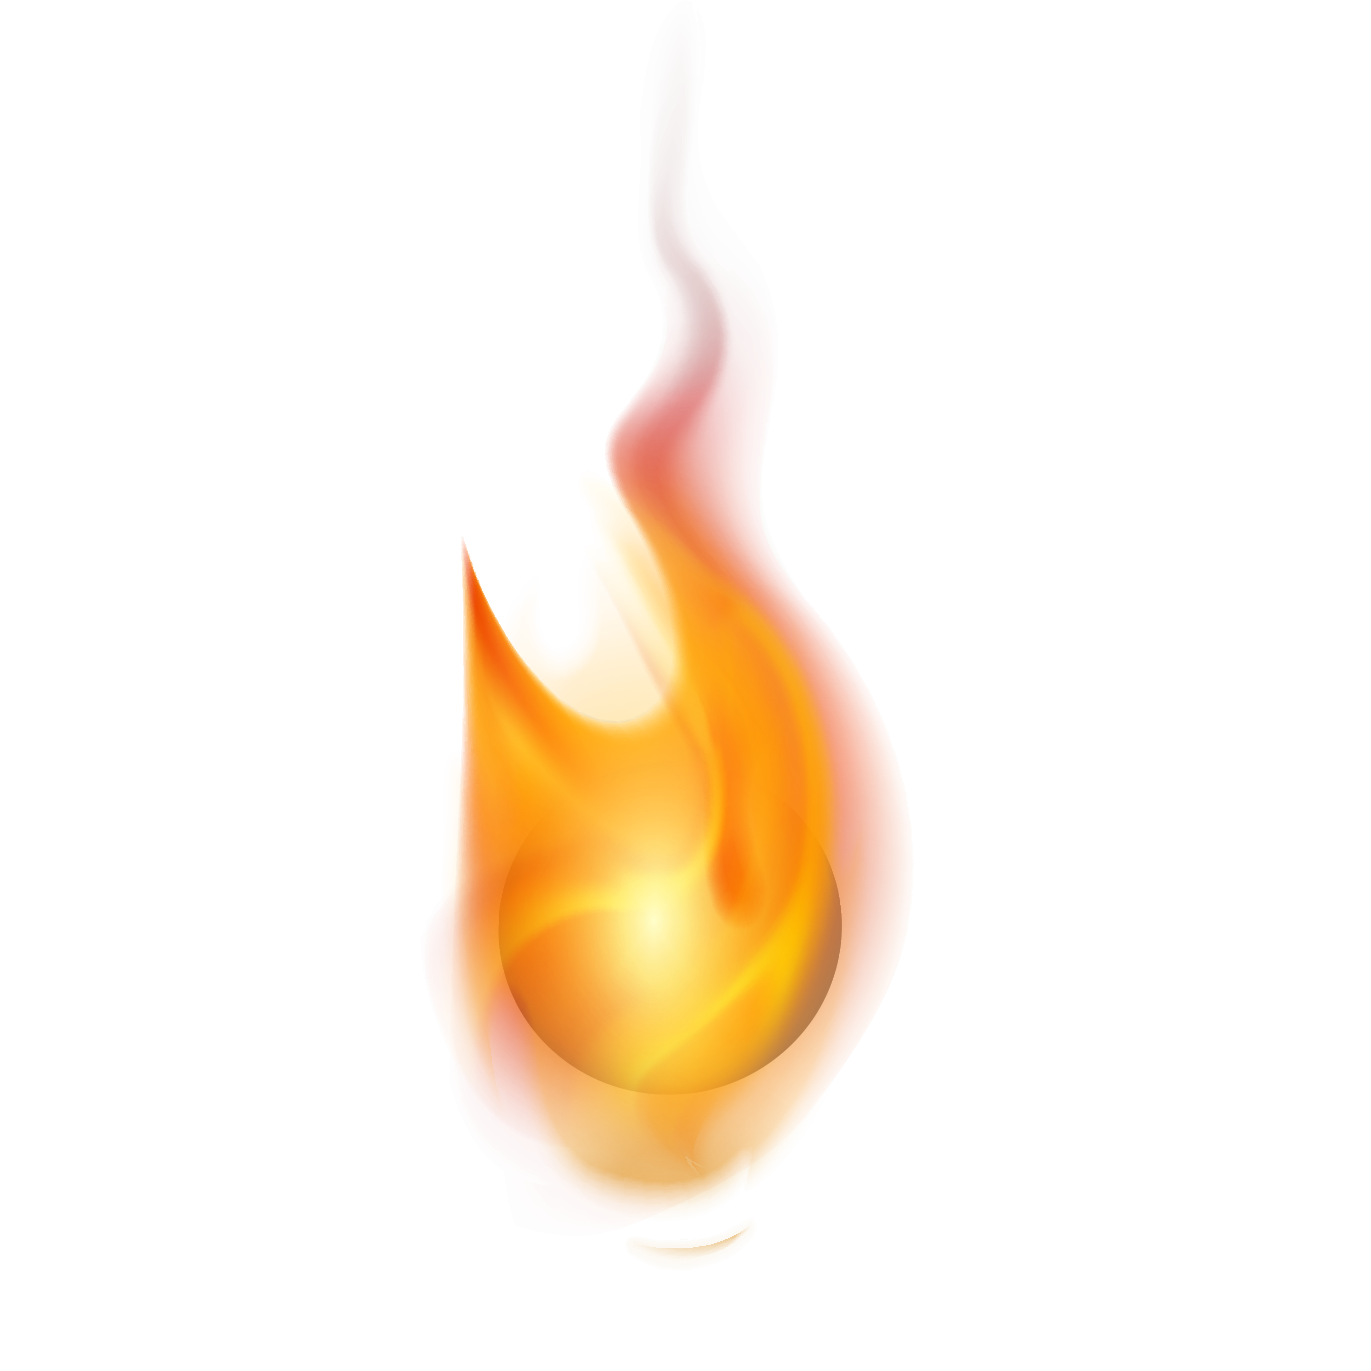 Flame Free Download Image PNG Image